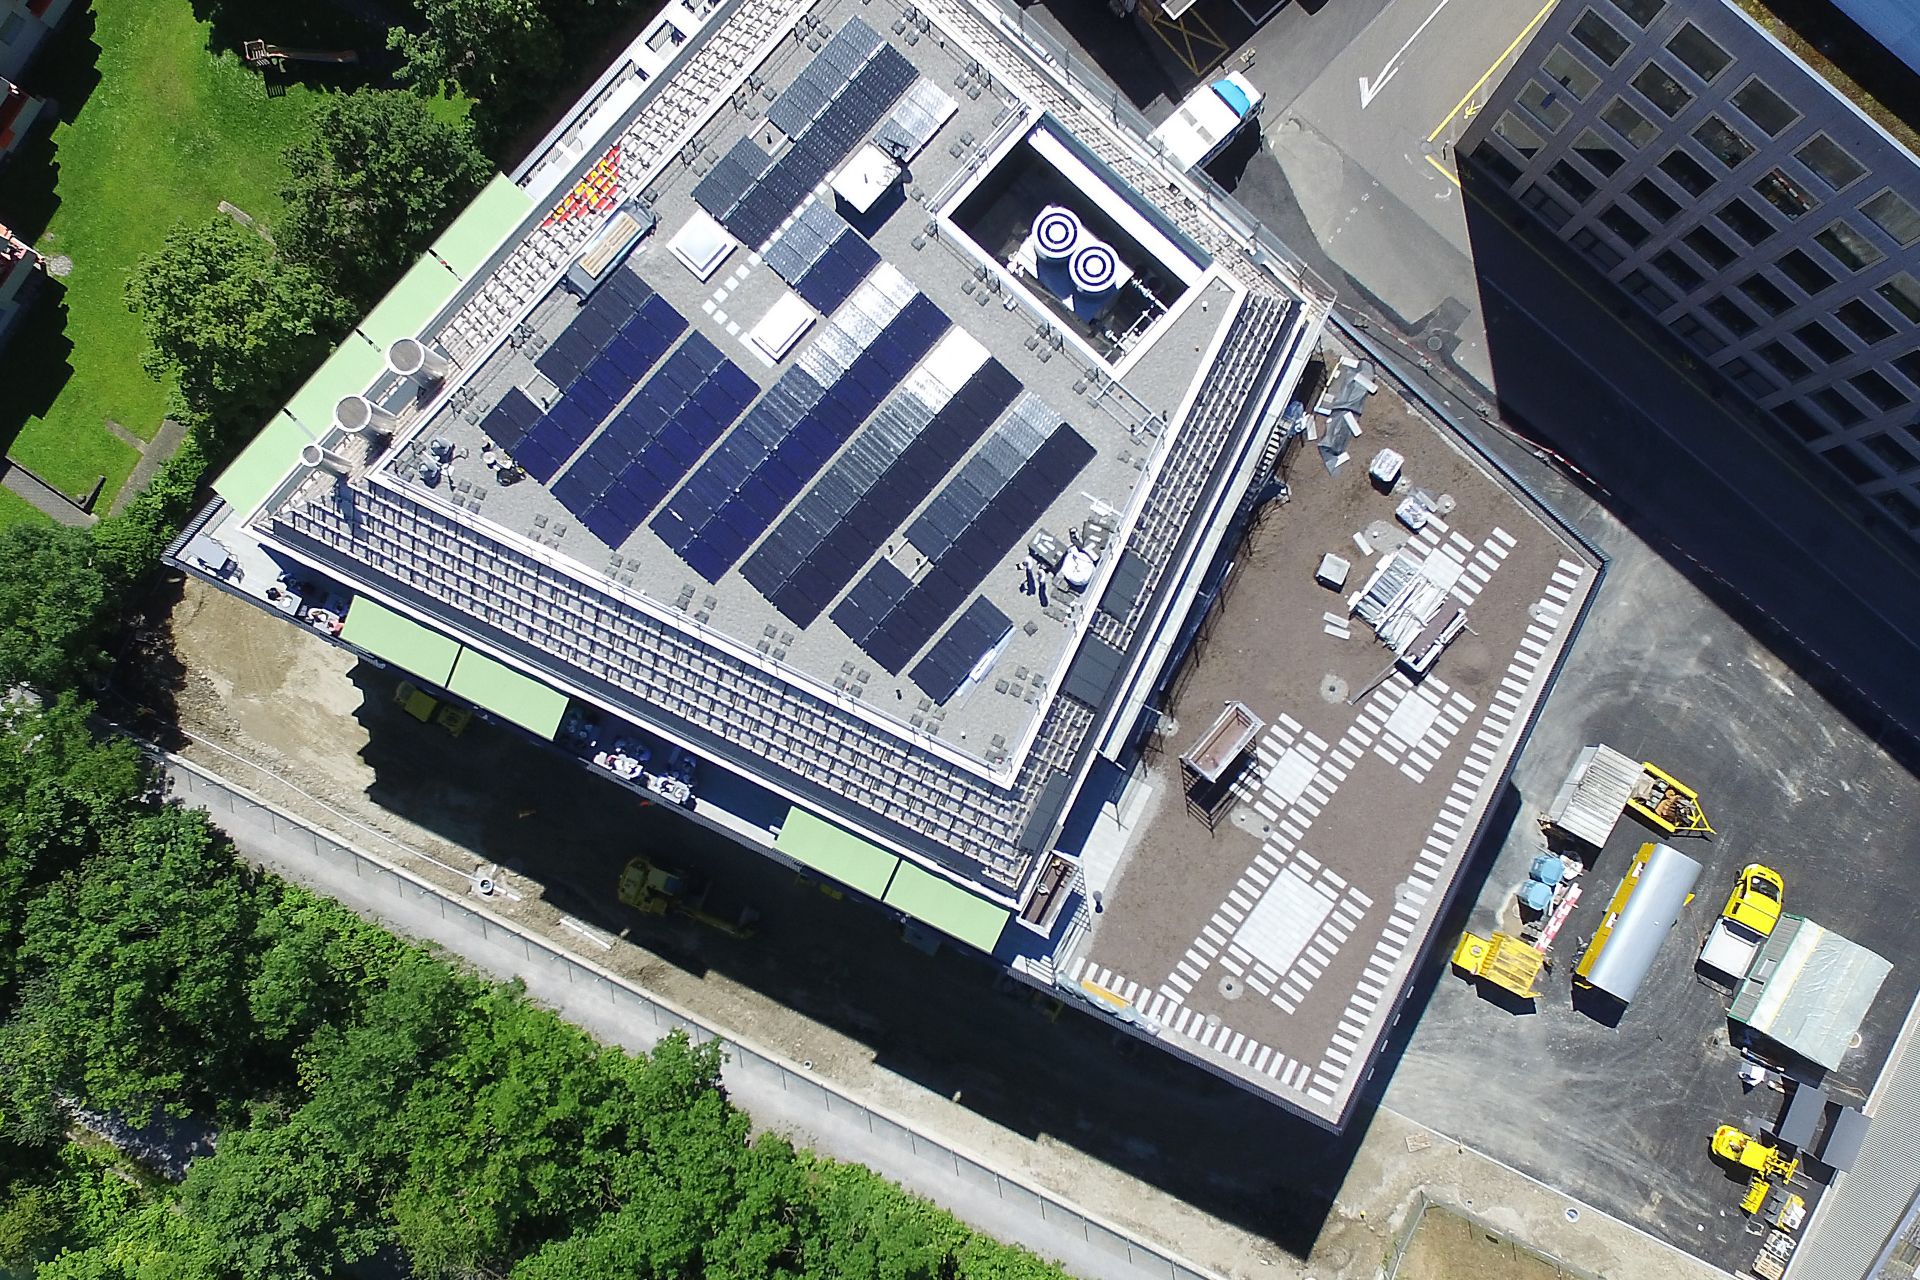 Solar PV panels mounted to roof at Limmat building in Zurich drone view